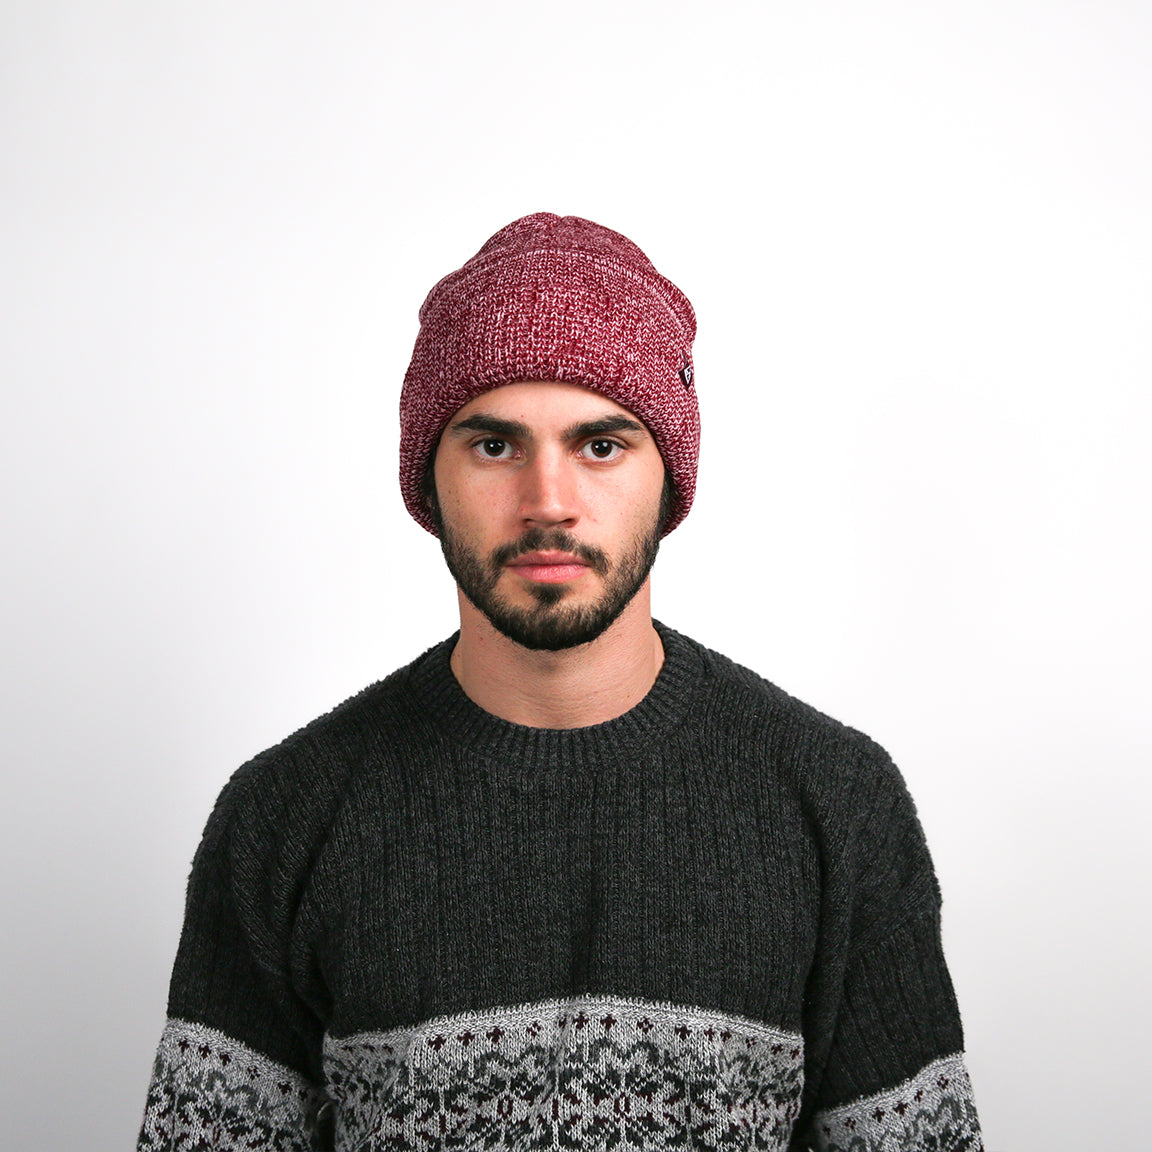 A person is wearing a loosely fitted, heathered knit beanie in a deep burgundy shade, providing a contemporary and fashionable appeal.